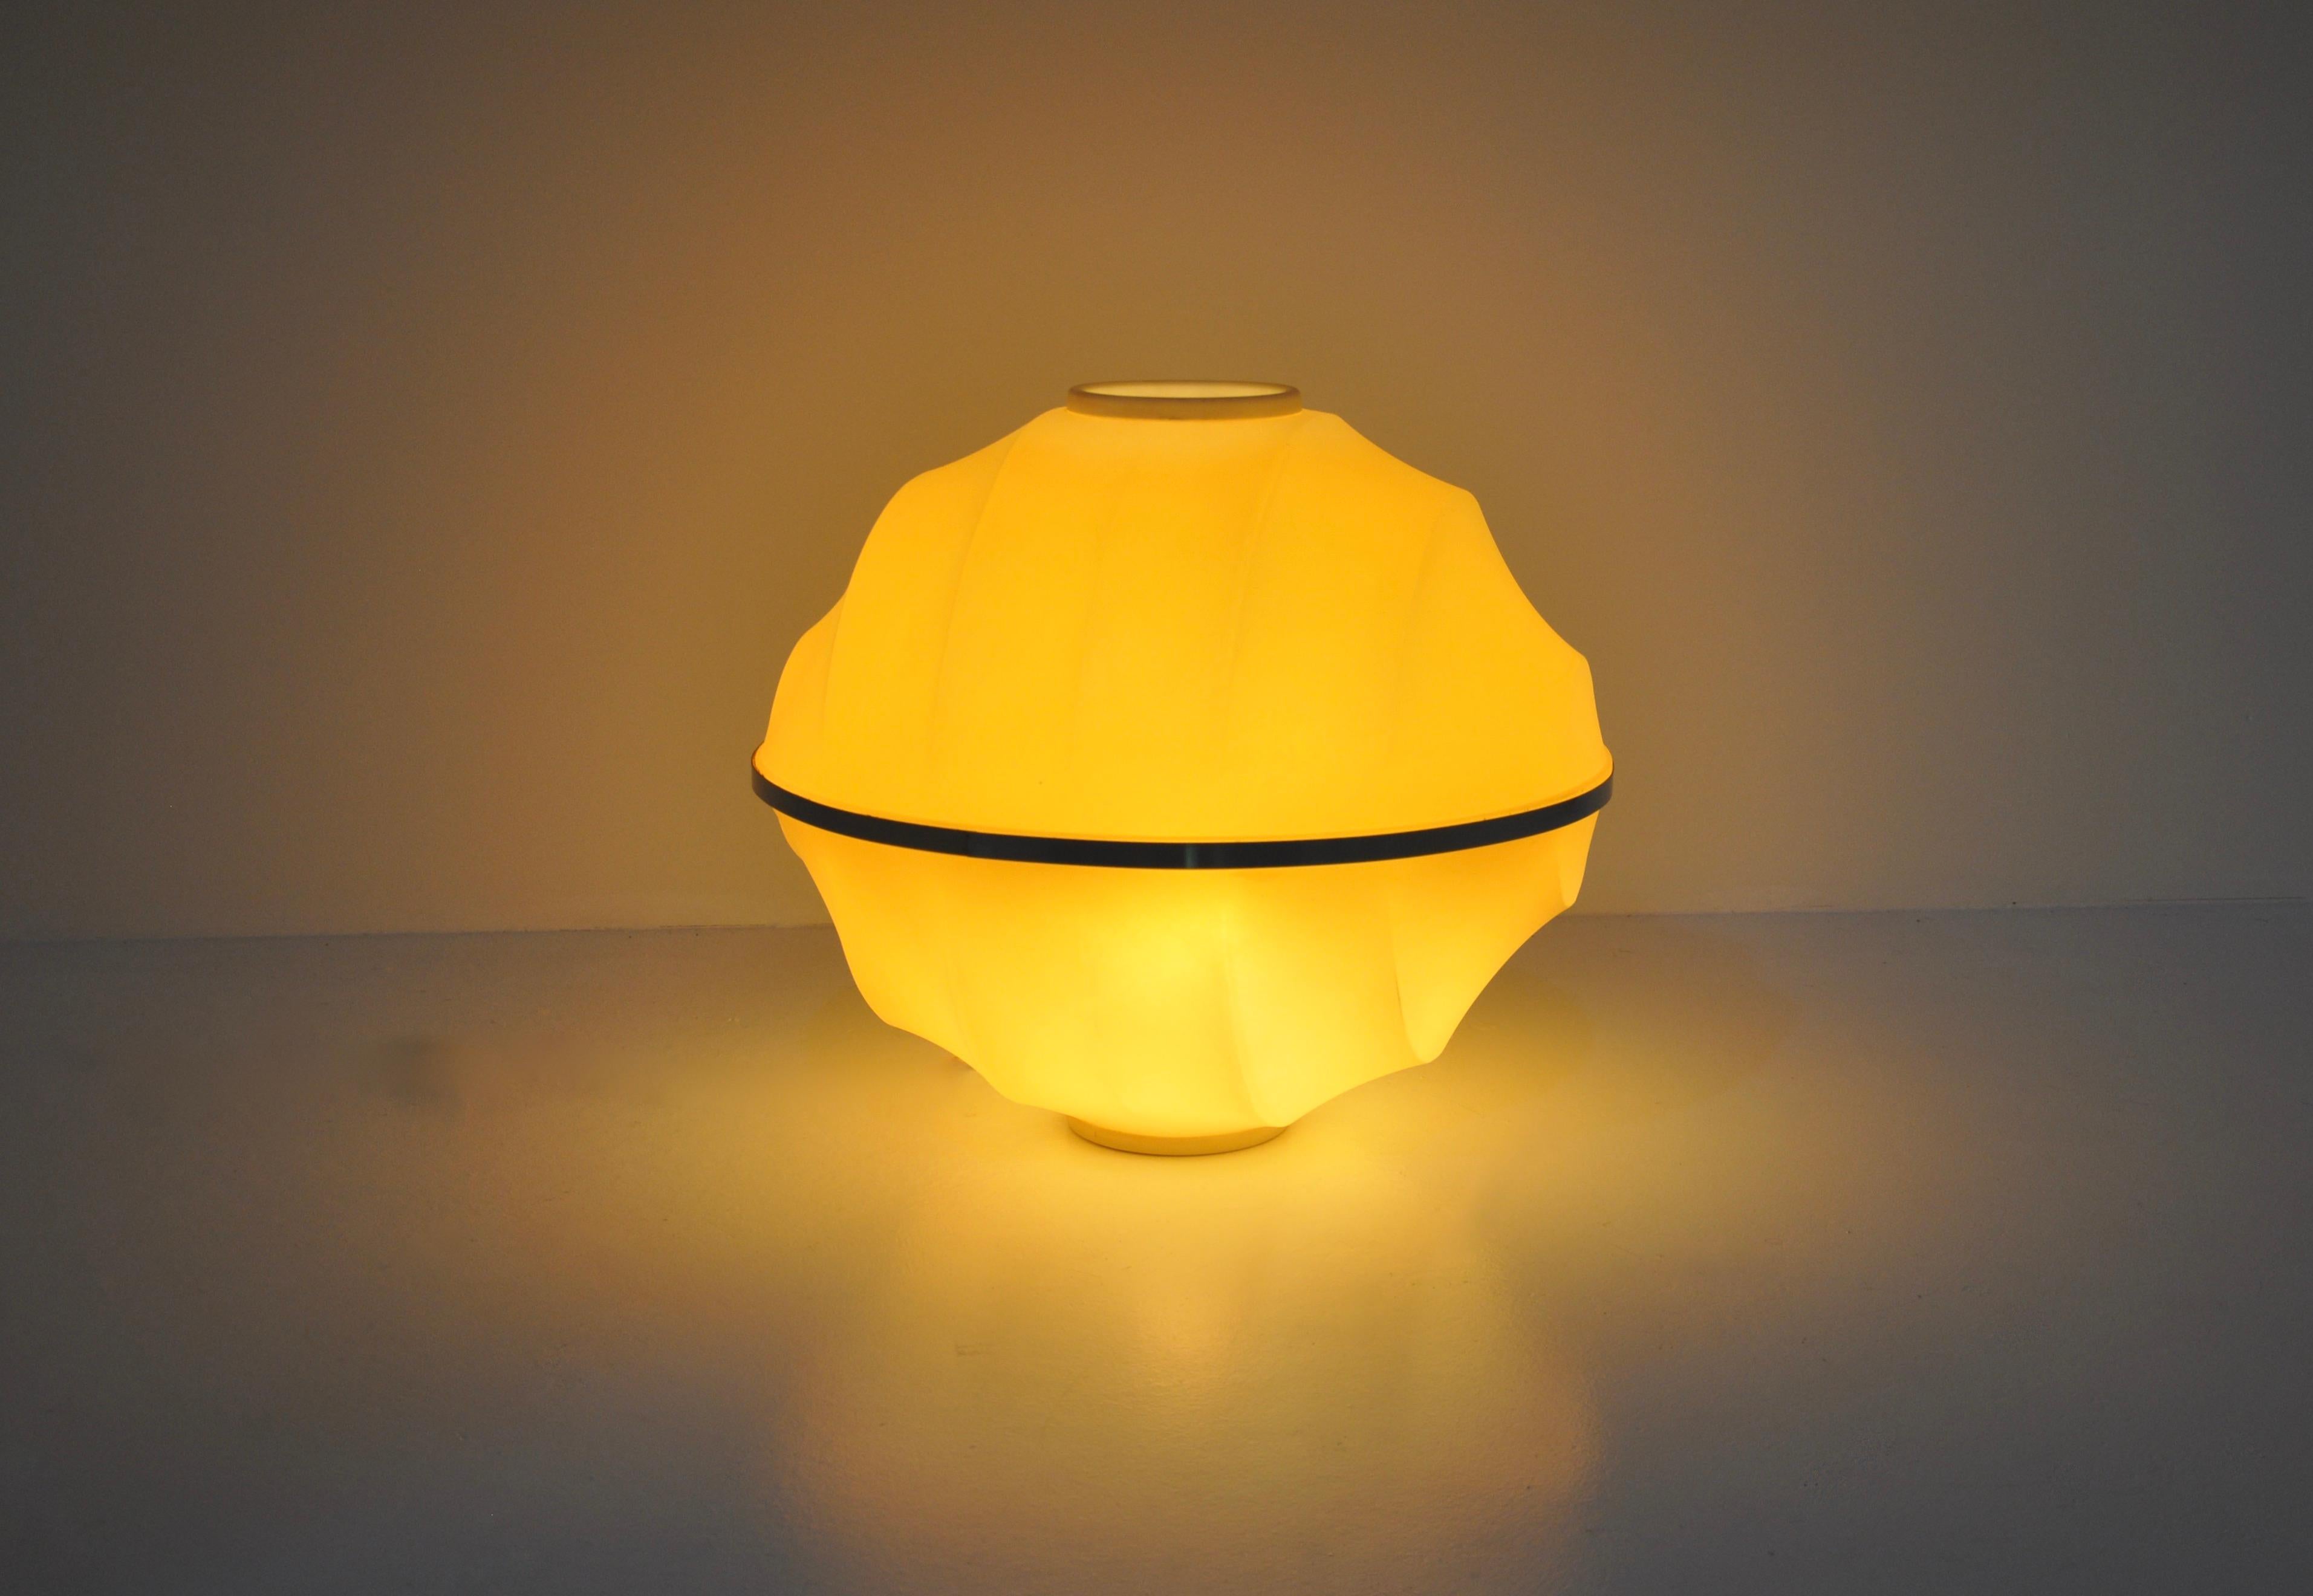 Orange lamp in plastic and metal. Wear due to time and age of the lamp.